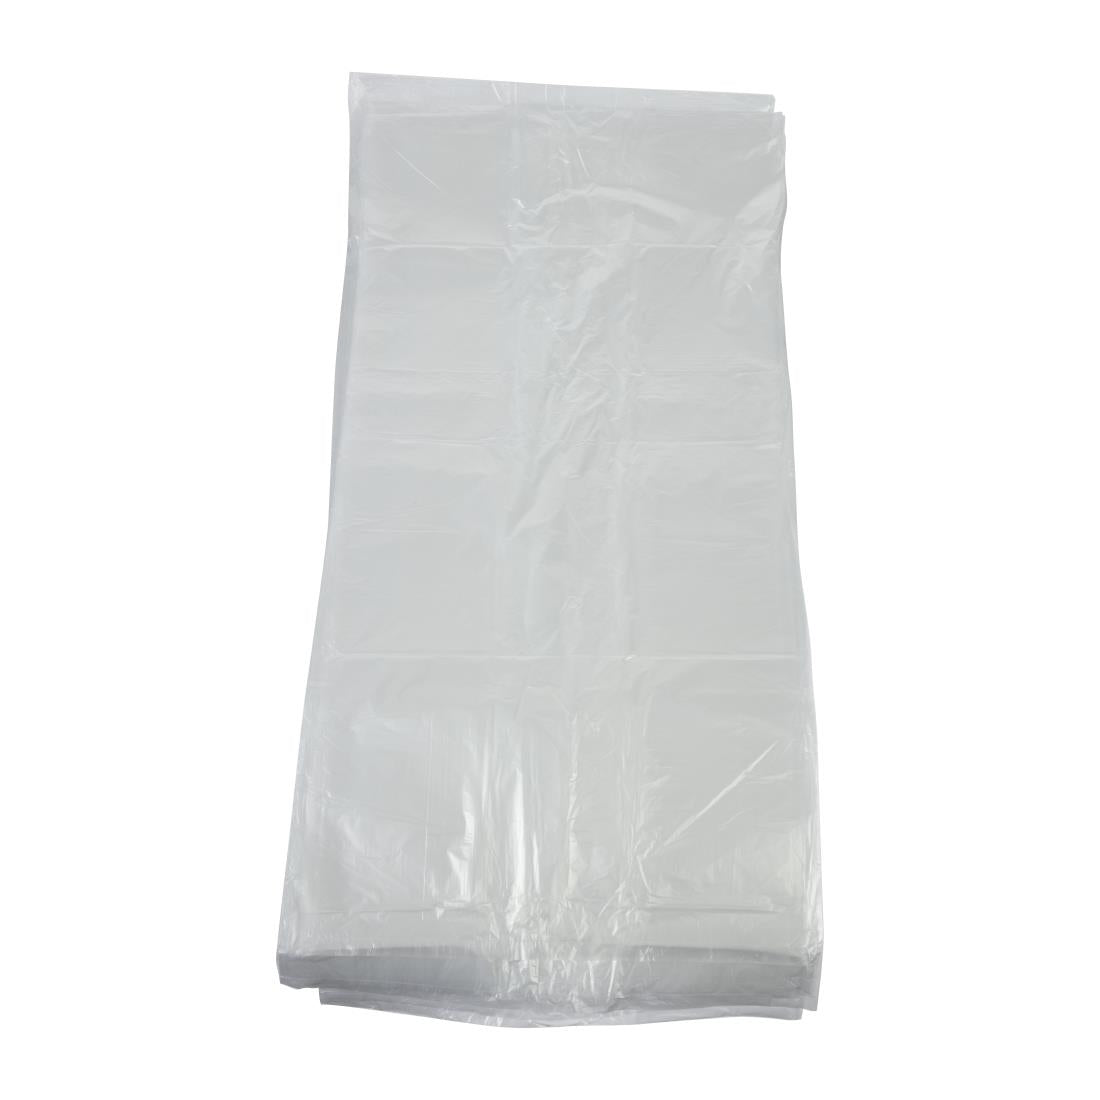 CH158 Jantex Light Duty Recycled Bin Bag 10kg 80ltr Clear (Pack of 200) JD Catering Equipment Solutions Ltd